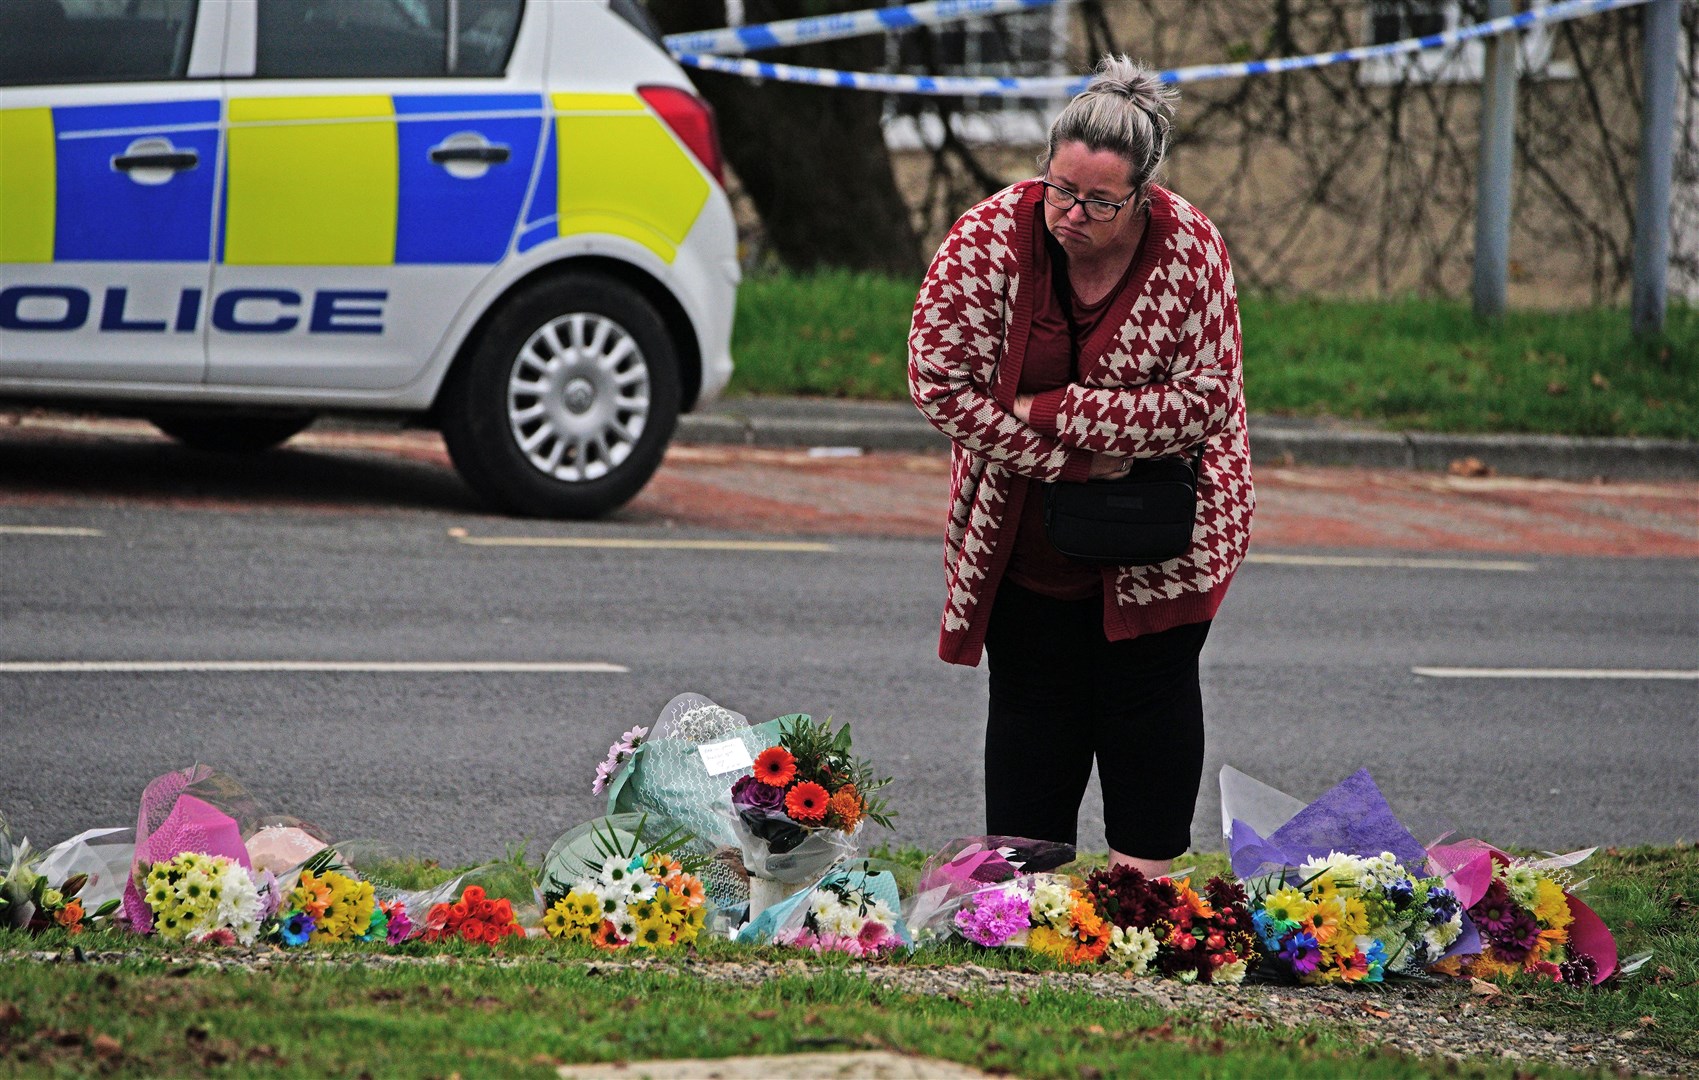 A woman lays flowers on Sheepstor Road in Plymouth (Ben Birchall/PA)